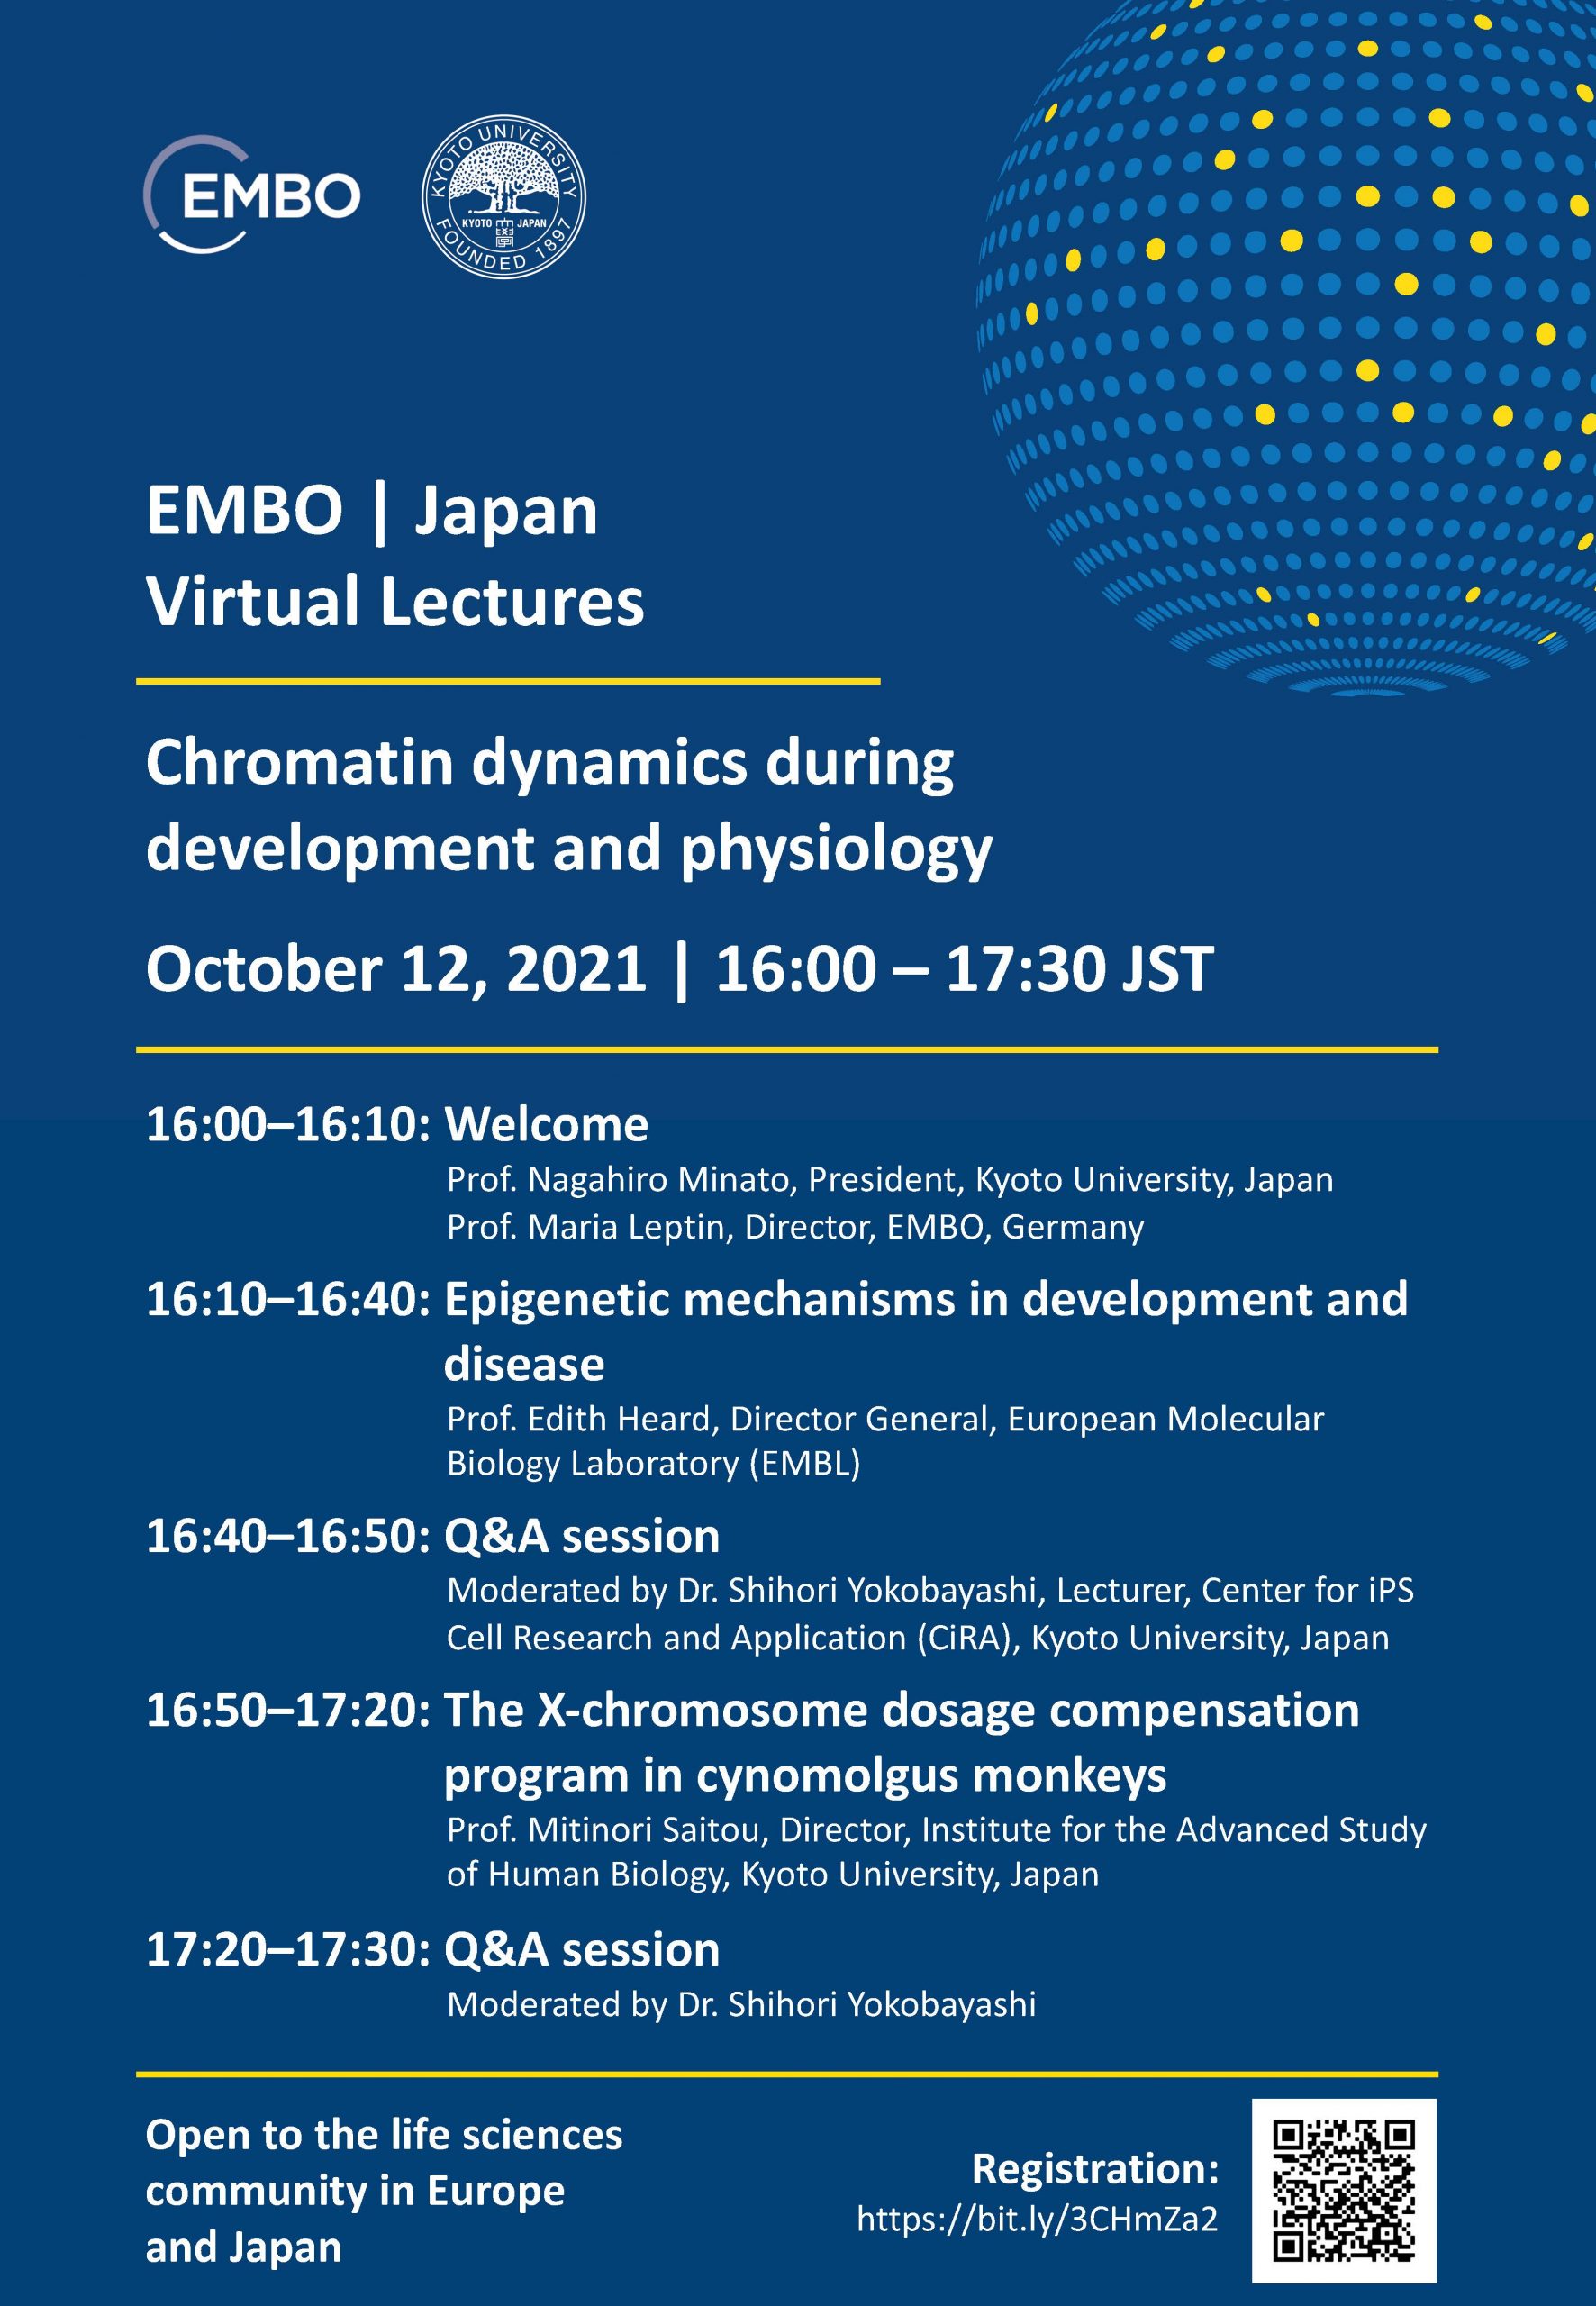 EMBO | Japan Virtual Lectures